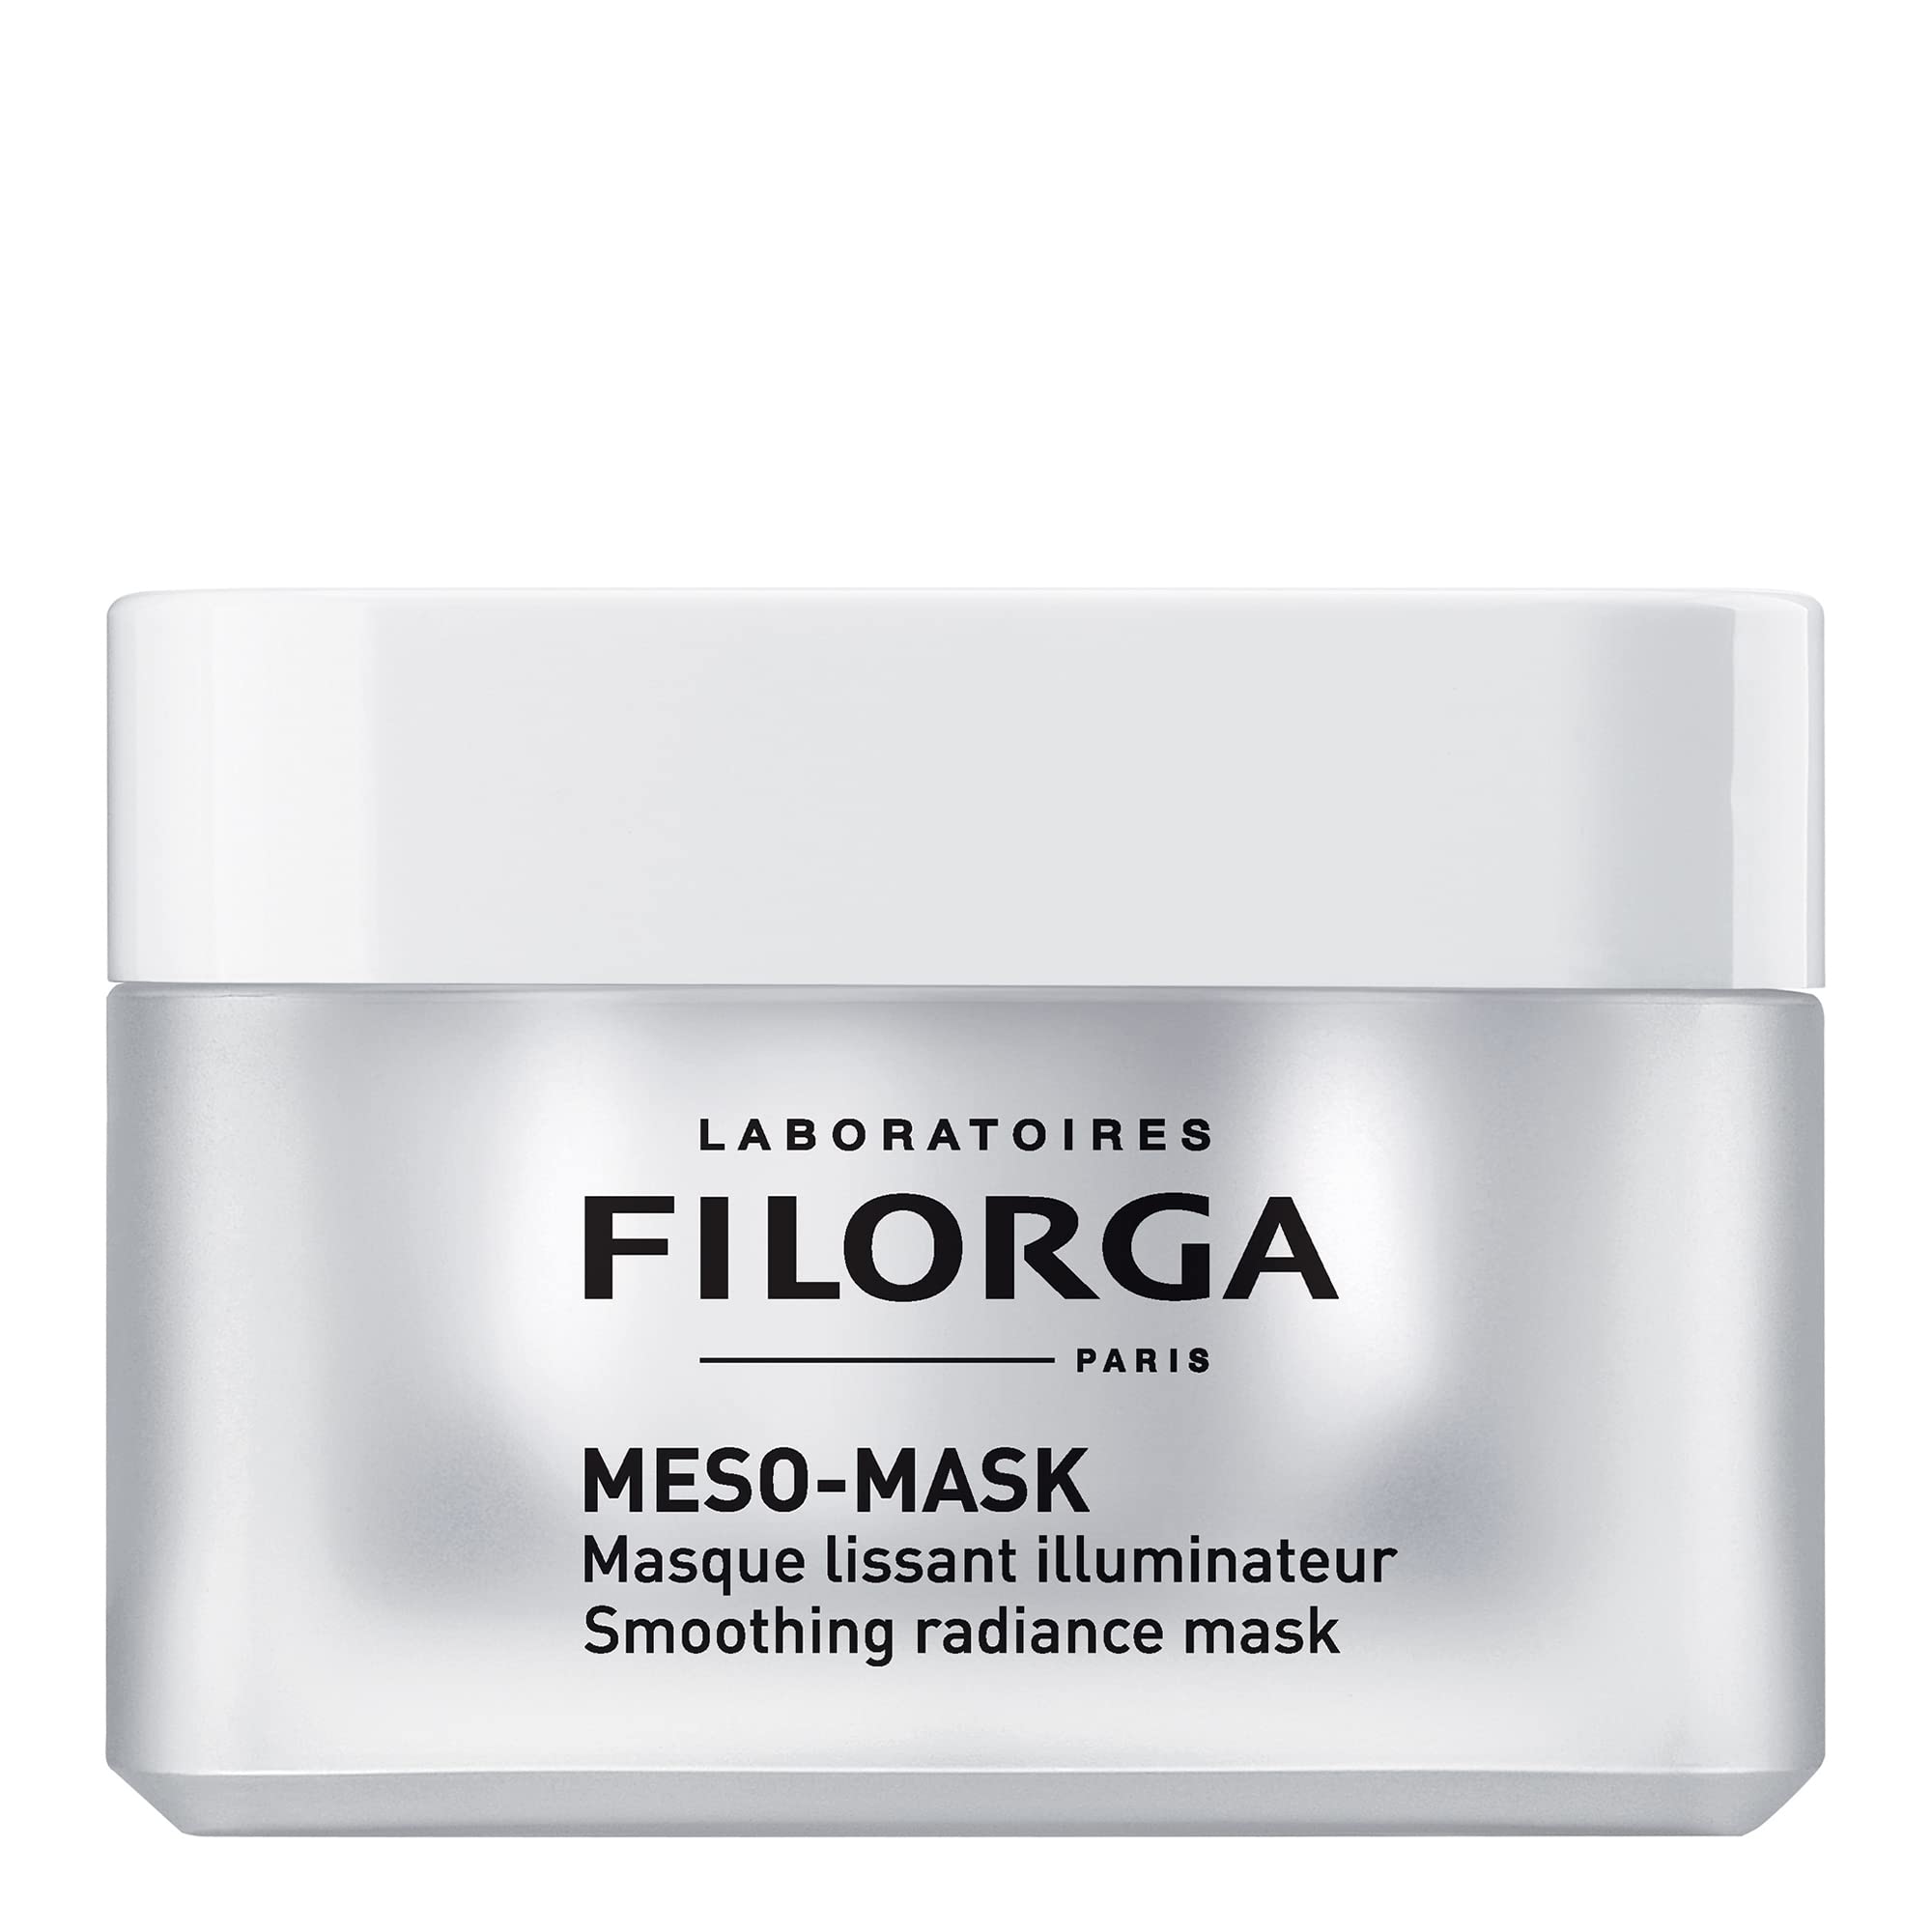 Filorga Meso-Mask Smoothing Face Mask, Anti Aging Formula With Collagen and Elastin Combo for Hydrating Wrinkle Reduction, Skin Moisturizing, and Complexion Brightening Skincare 1.69 fl. oz.